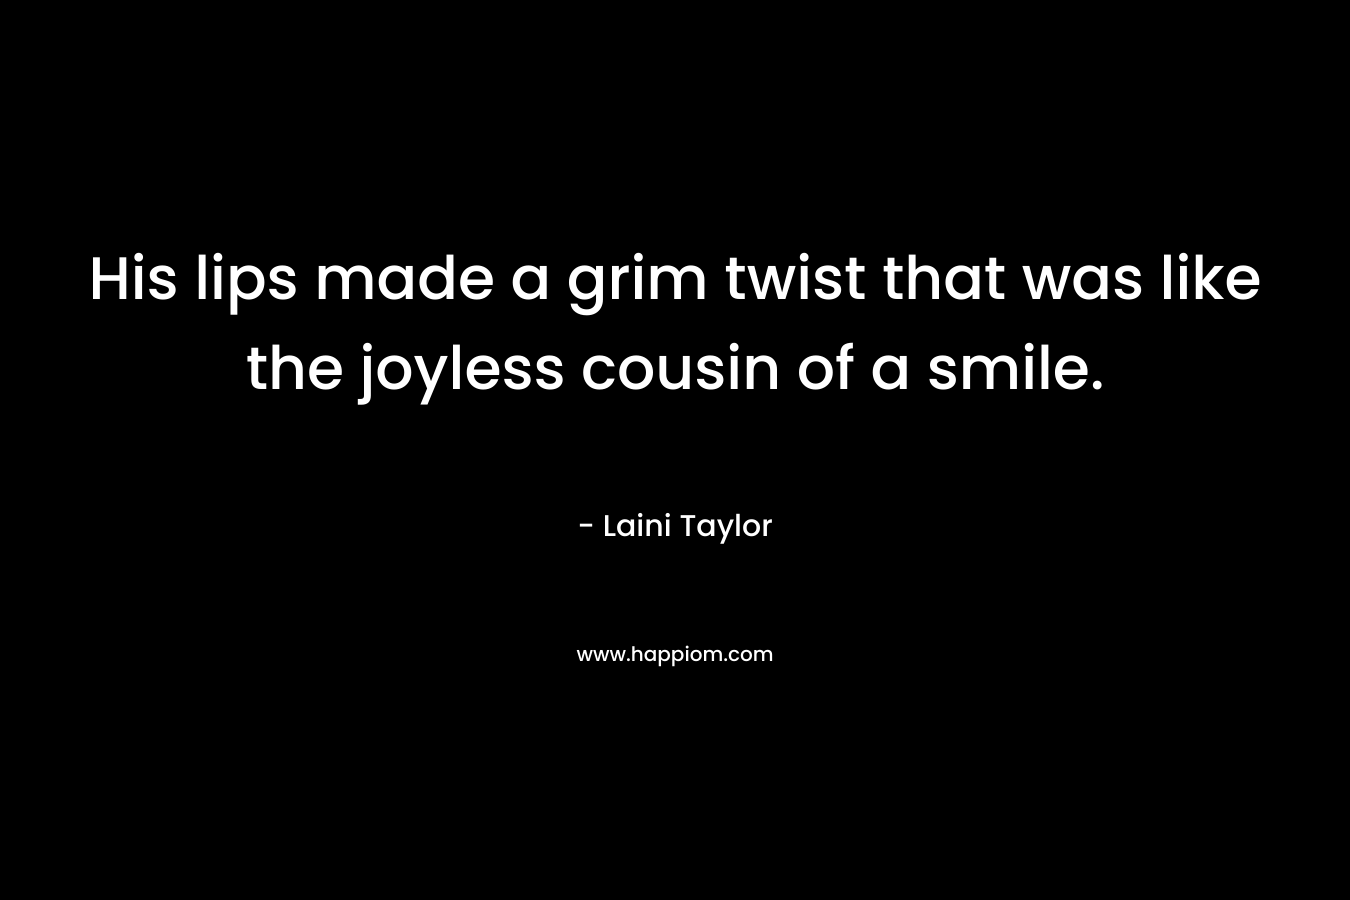 His lips made a grim twist that was like the joyless cousin of a smile. – Laini Taylor